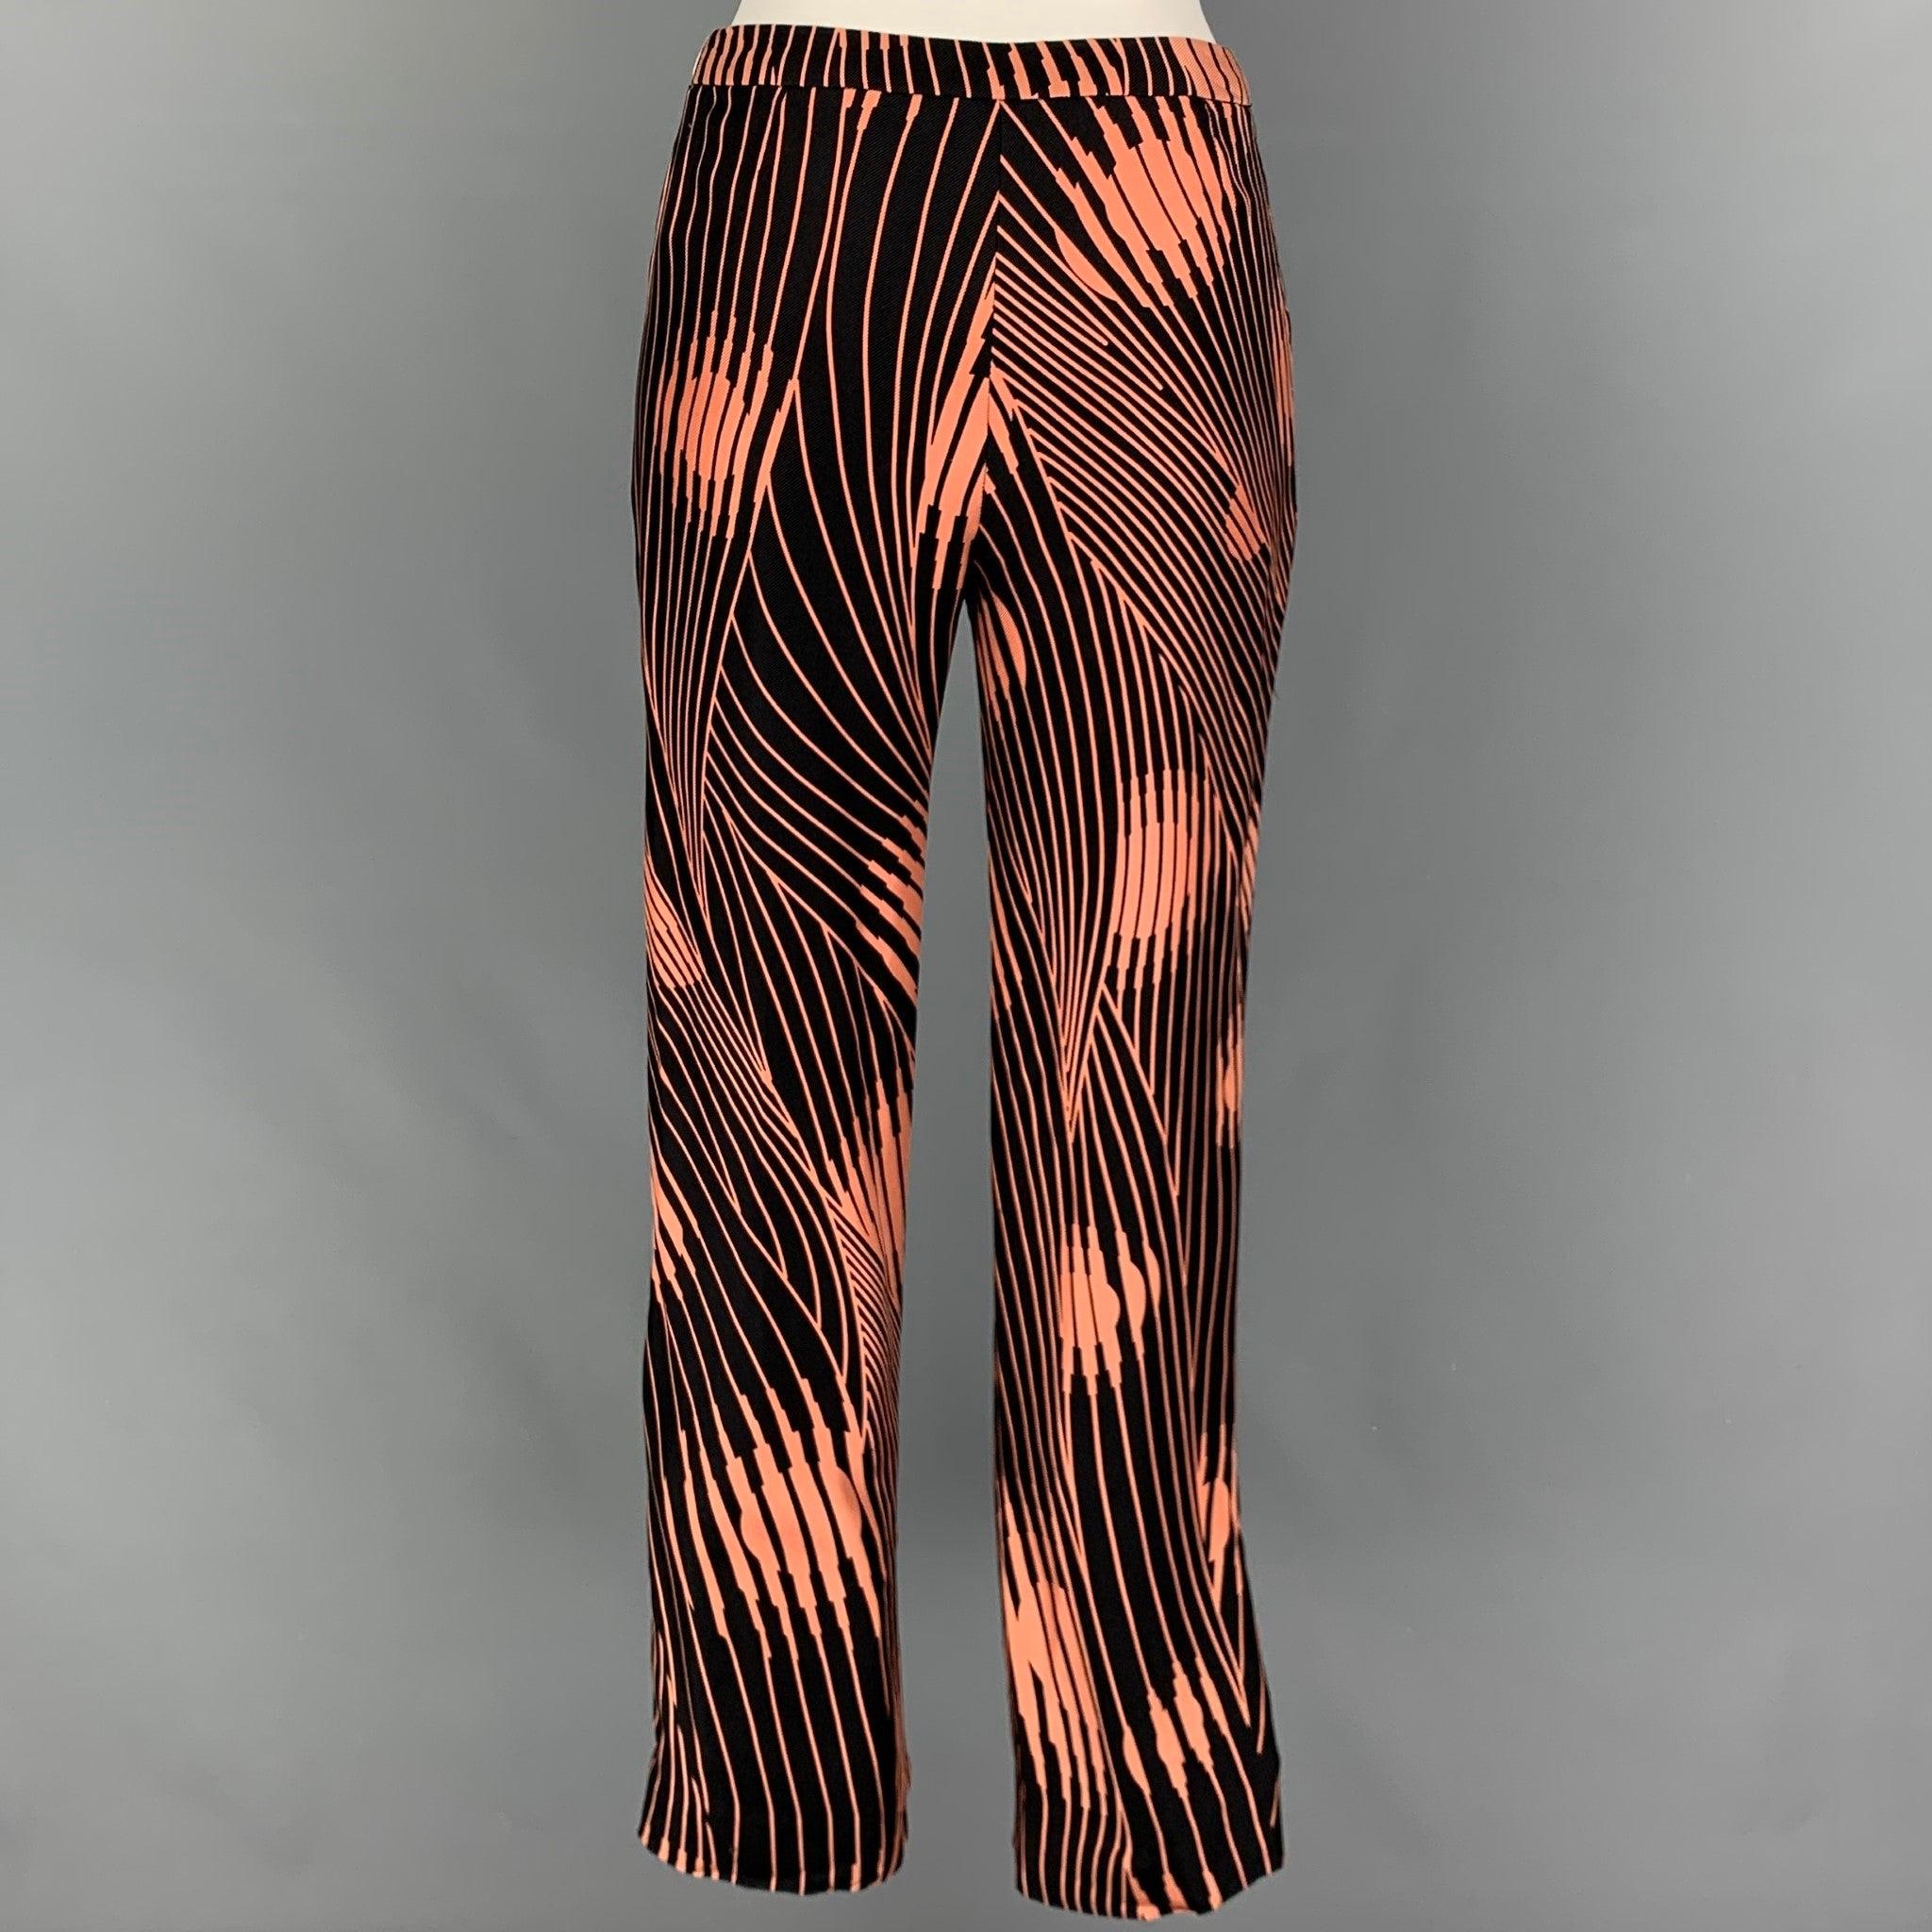 GIANNI VERSACE pants comes in a black & coral abstract print material featuring a flat front, front tab, and a zip fly closure. Made in Italy.
Very Good
Pre-Owned Condition. Fabric tag removed. 

Marked:   40 

Measurements: 
  Waist: 26 inches 